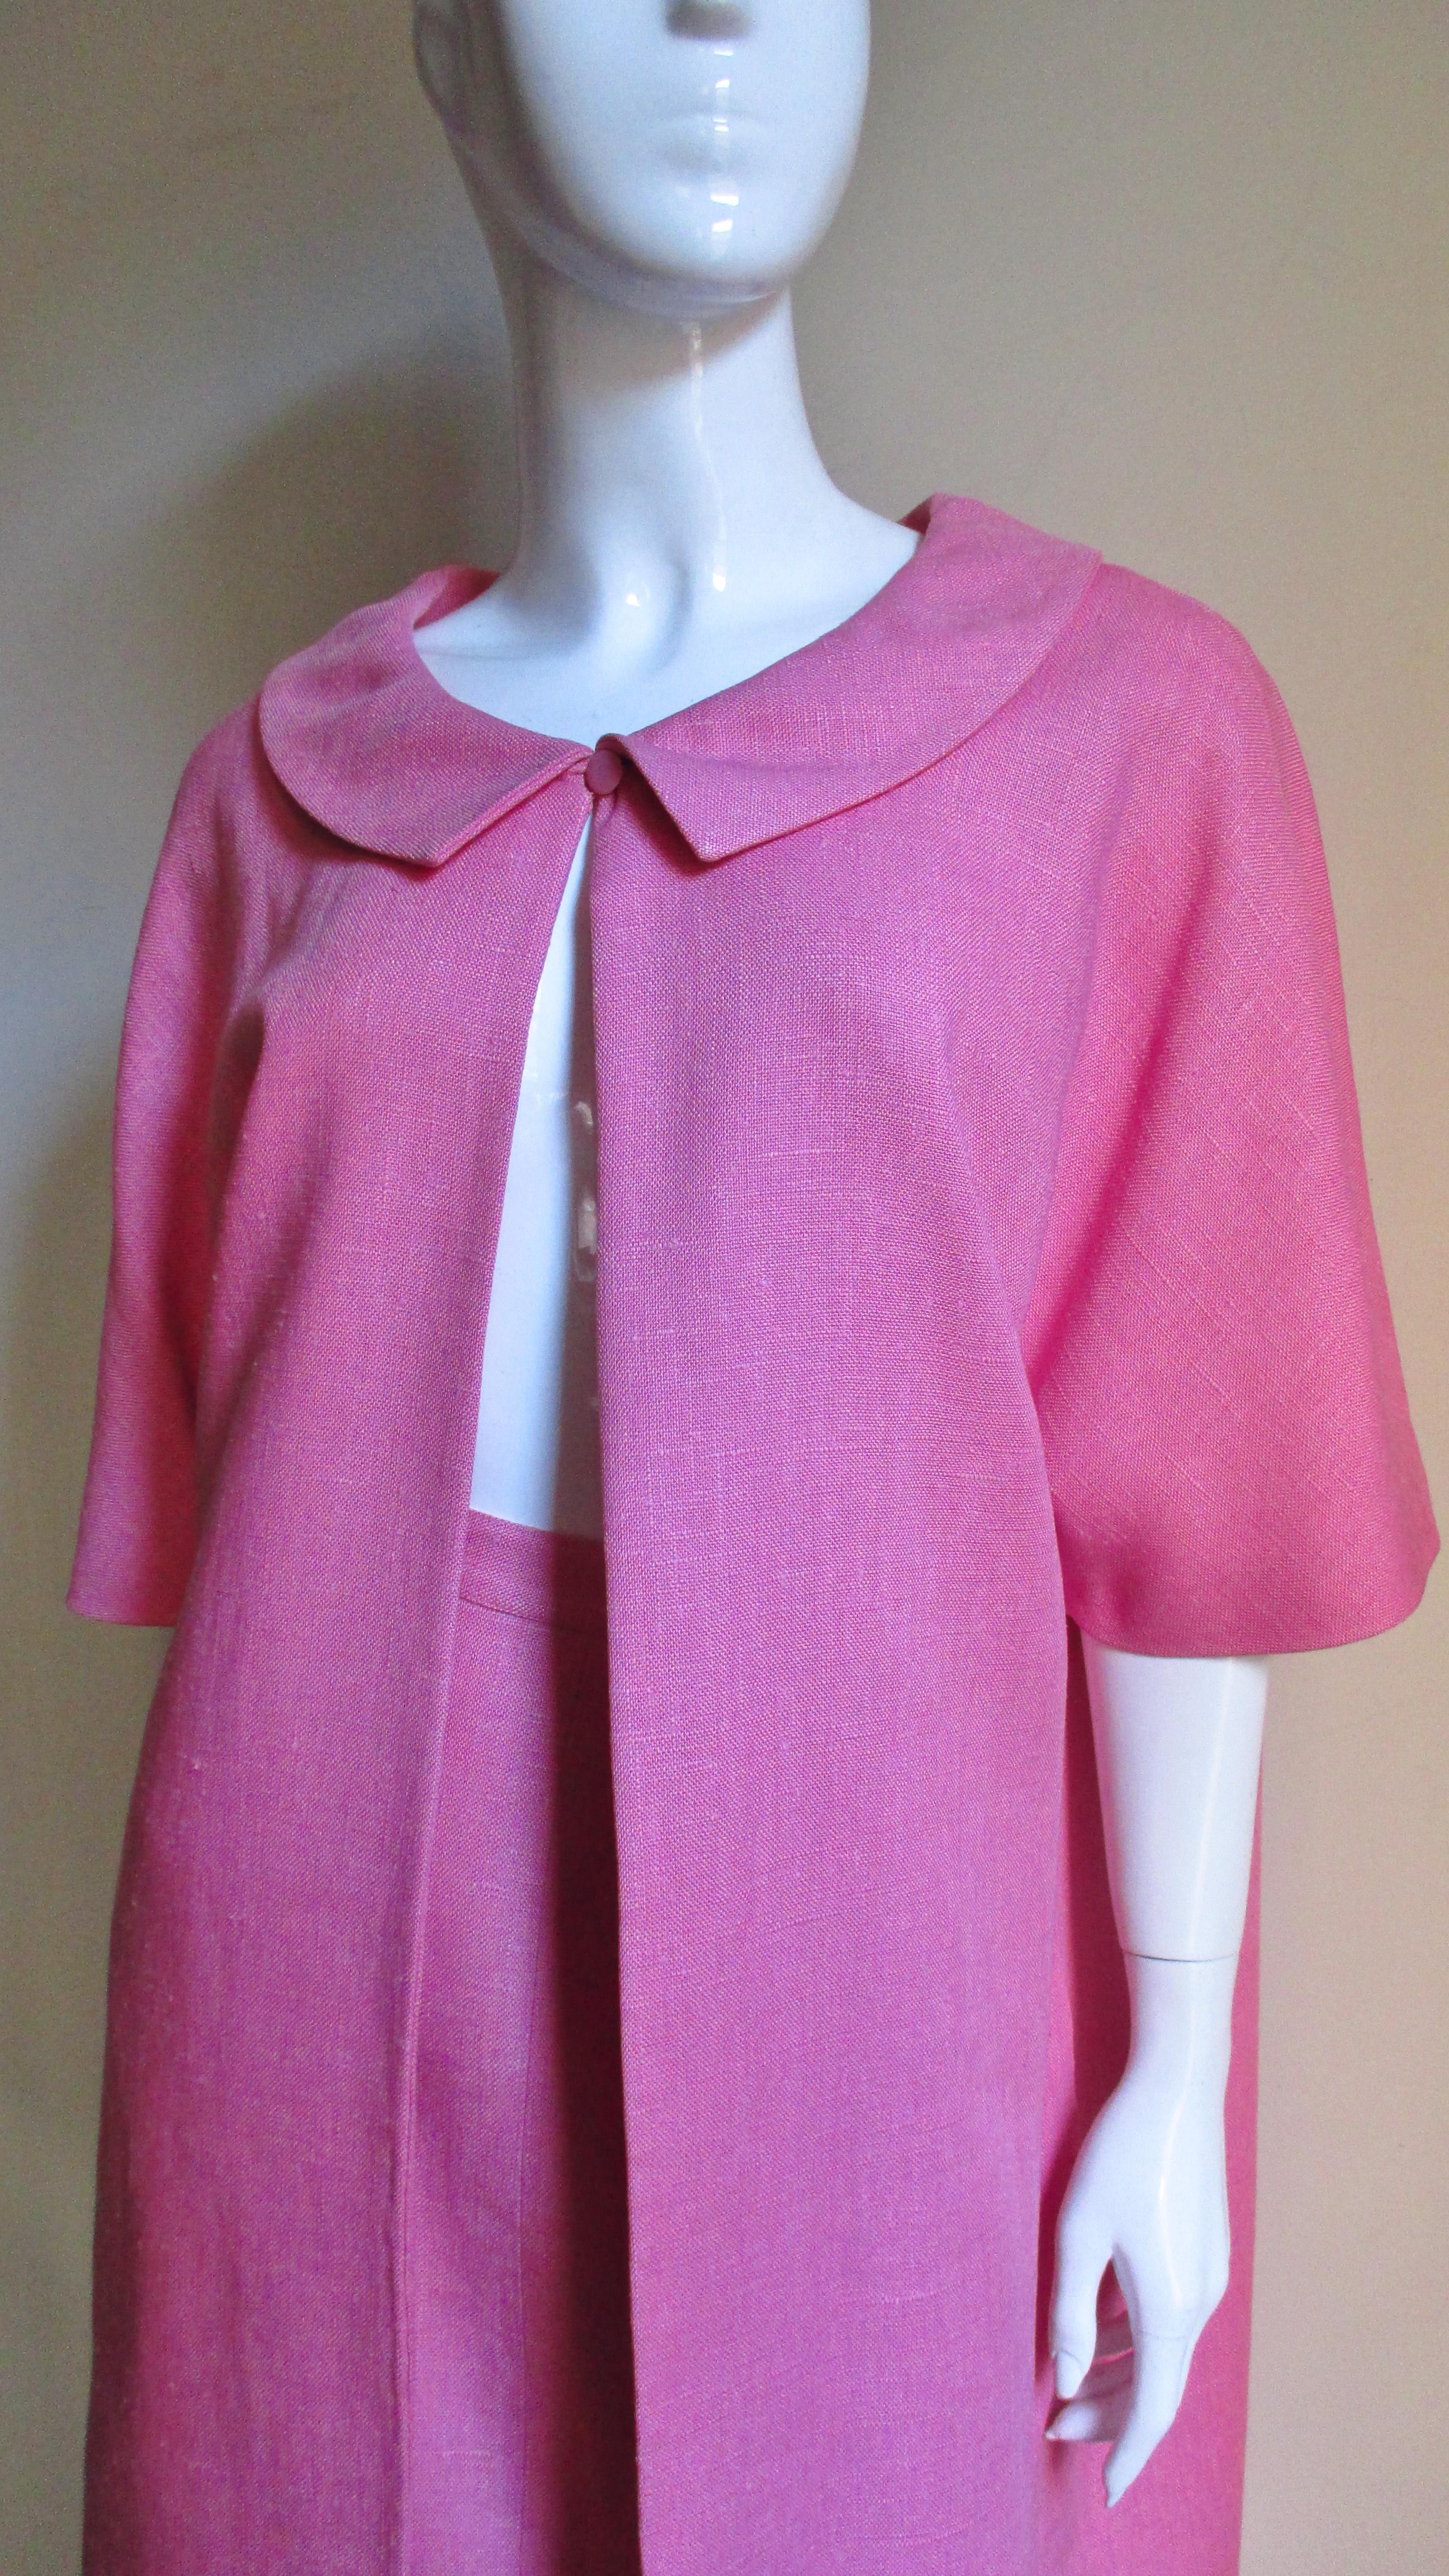 A pretty pink linen skirt and coat set from B H Wragge consisting of a straight skirt with a small waistband and a coat with a collar, elbow length sleeves and side seam pockets. The coat is lined in white silk with matching pink abstract shapes